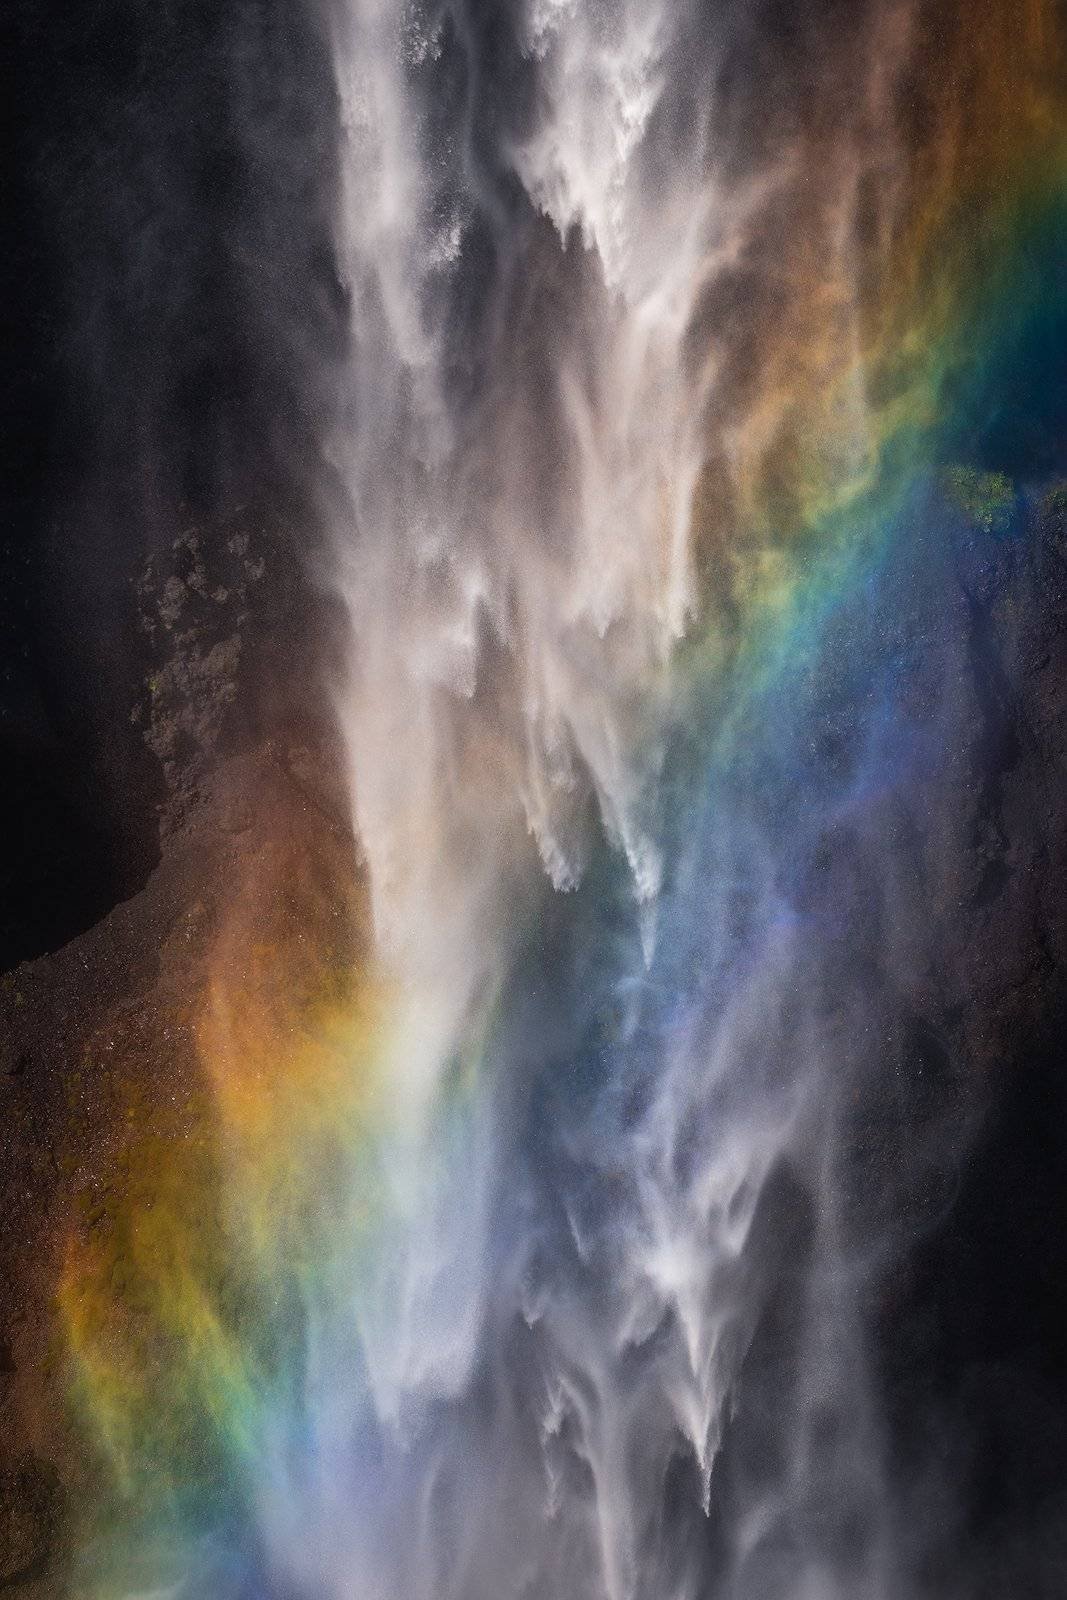 Iceland Landscape Photography, abstract waterfall and rainbow